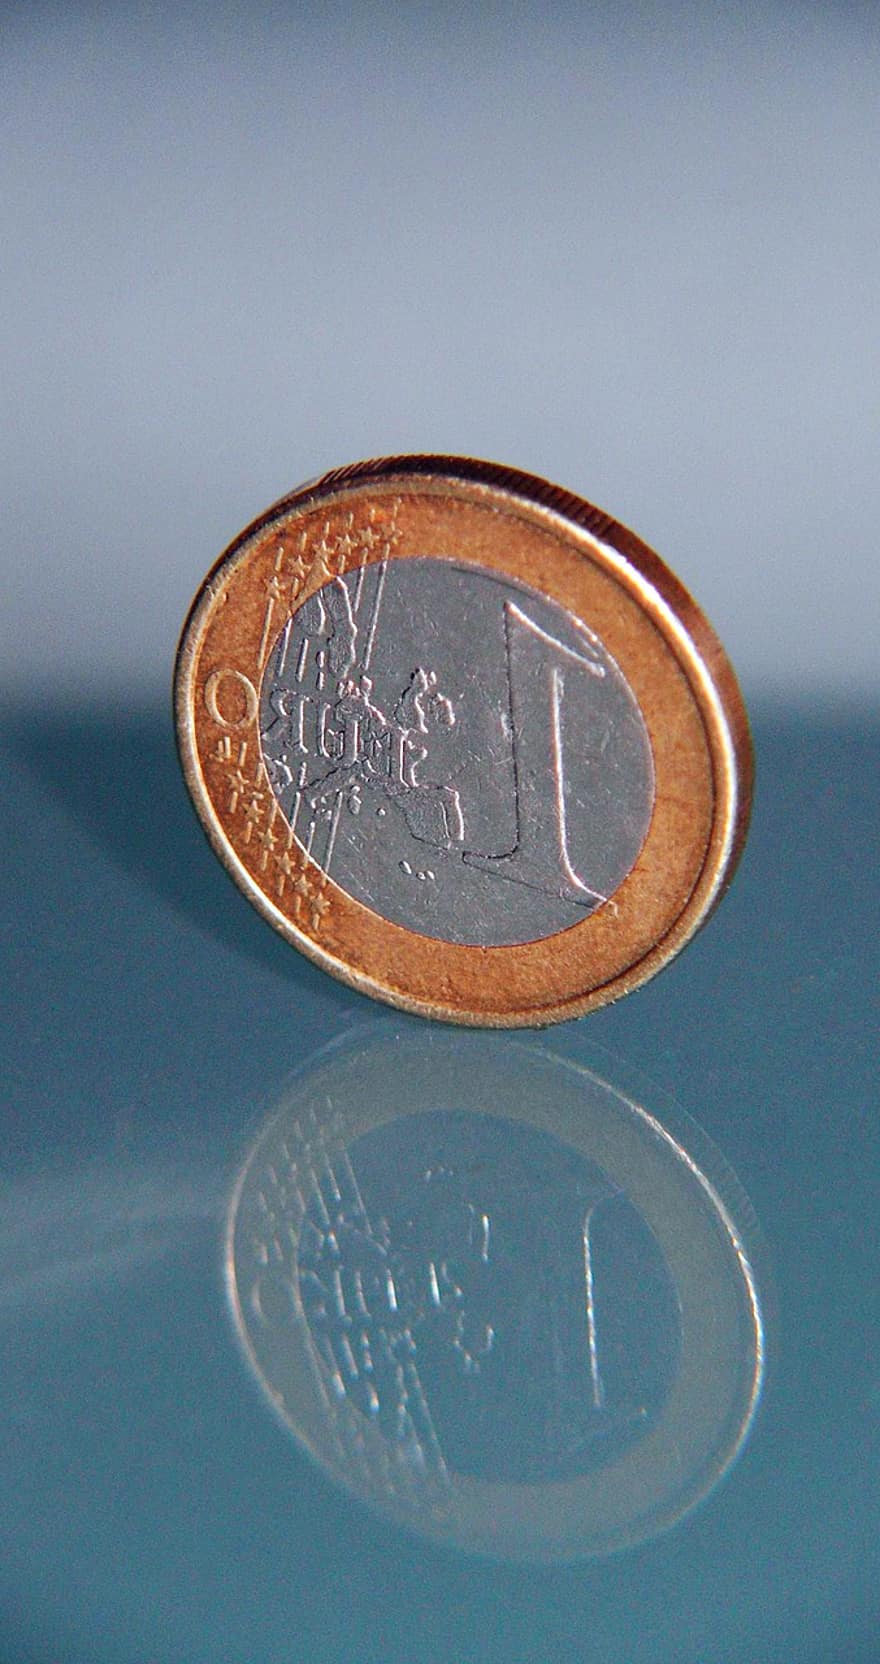 Euro, Euro Coin, Coin, Finance, Currency, Savings, Investment